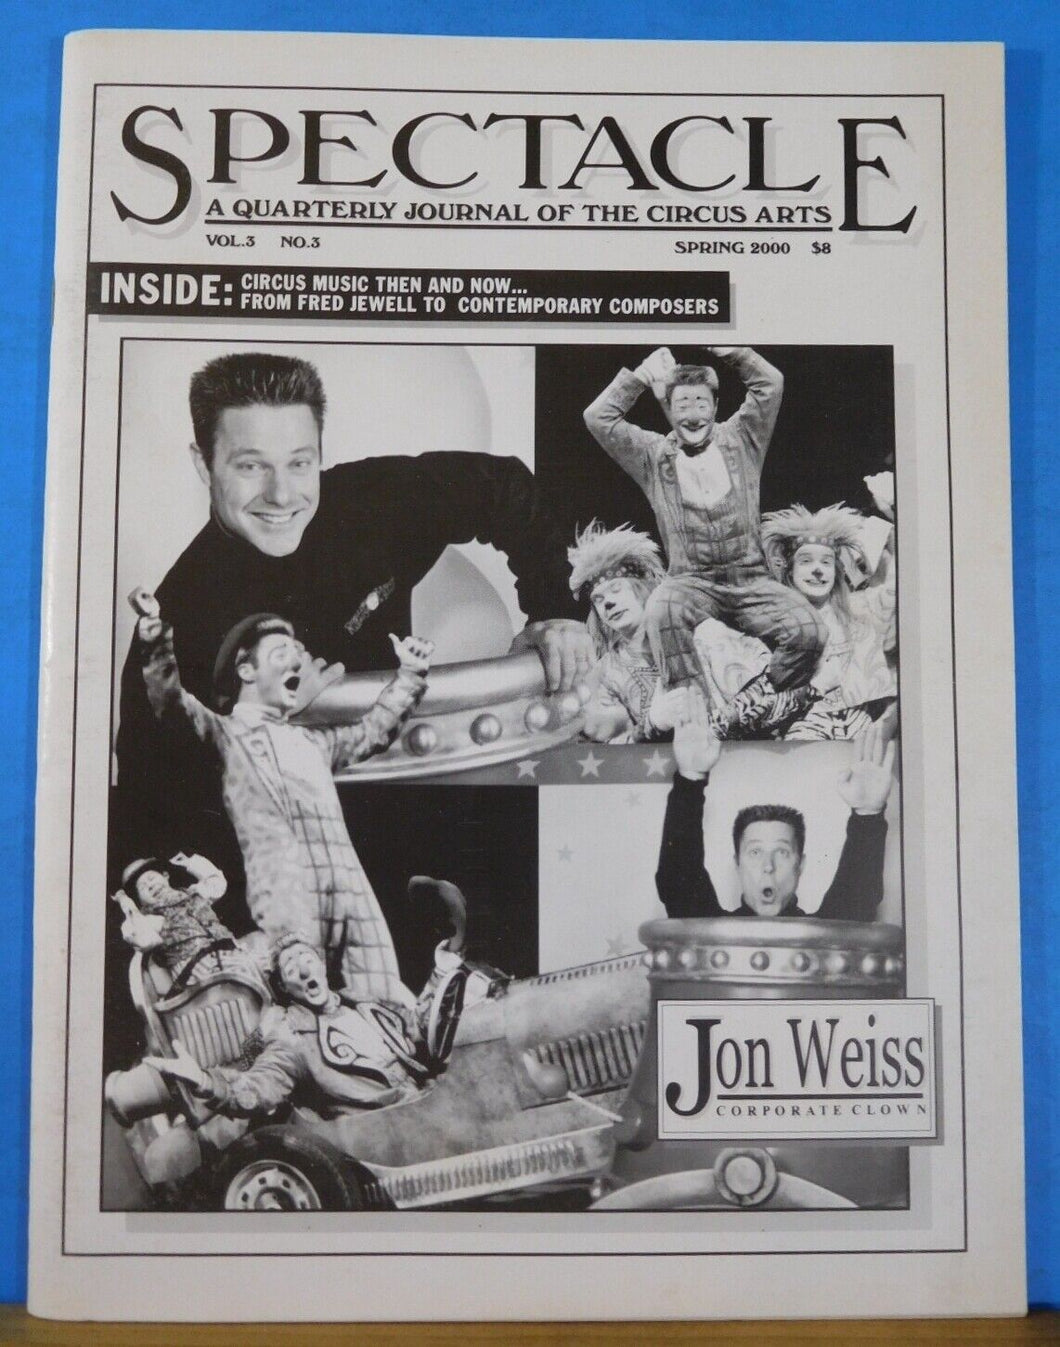 Spectacle 2000 Spring Quarterly Journal of the Circus Art